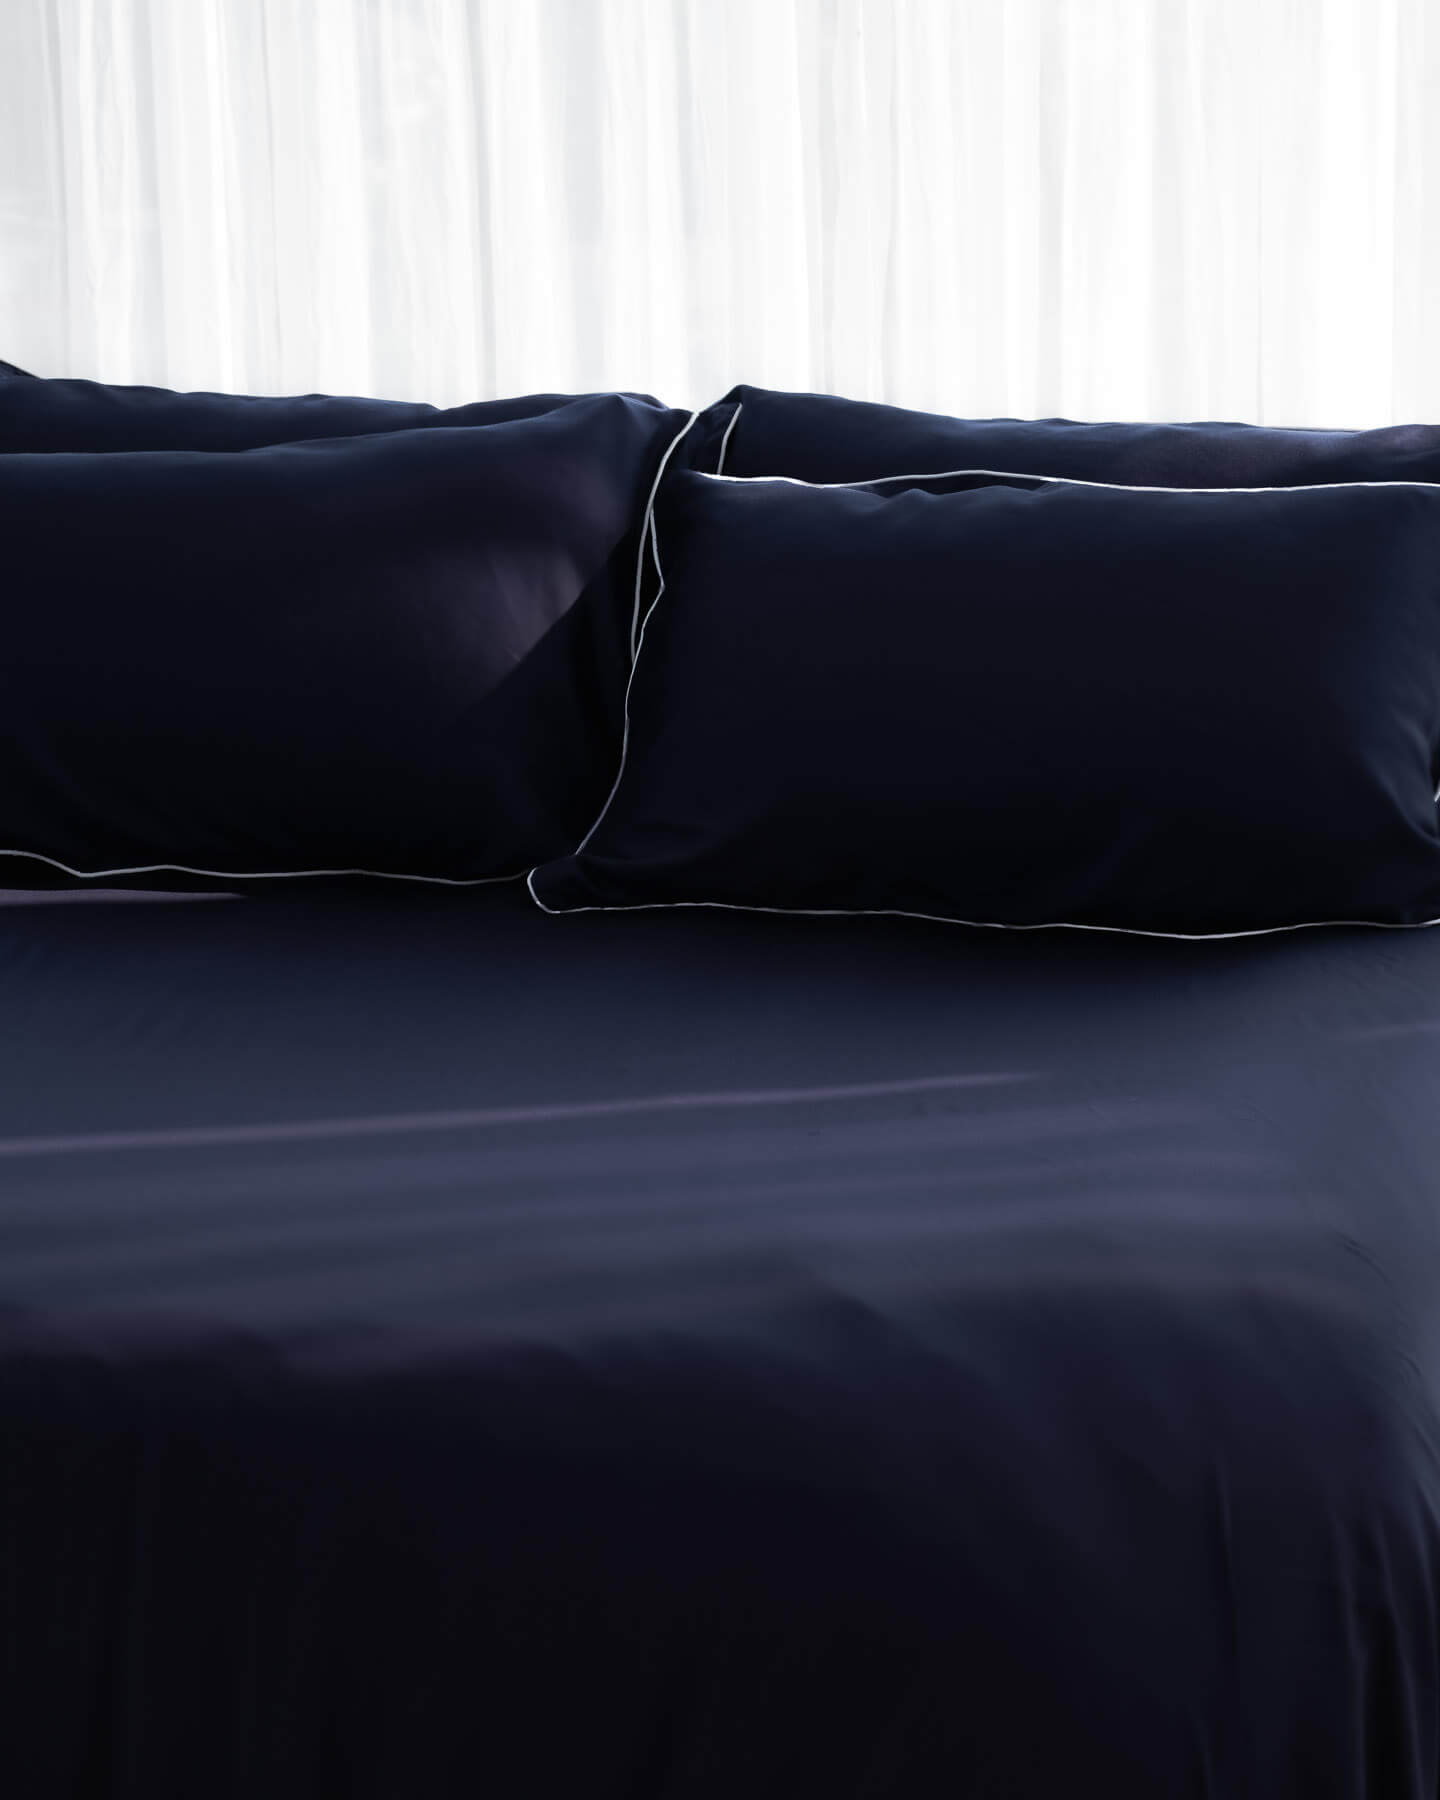 ava and ava philippines organic bamboo lyocell sheet set (2 pillowcases 1 fitted sheet) in ocean (navy with white piping). ava and ava ph soft, cooling, breathable bed sheets.